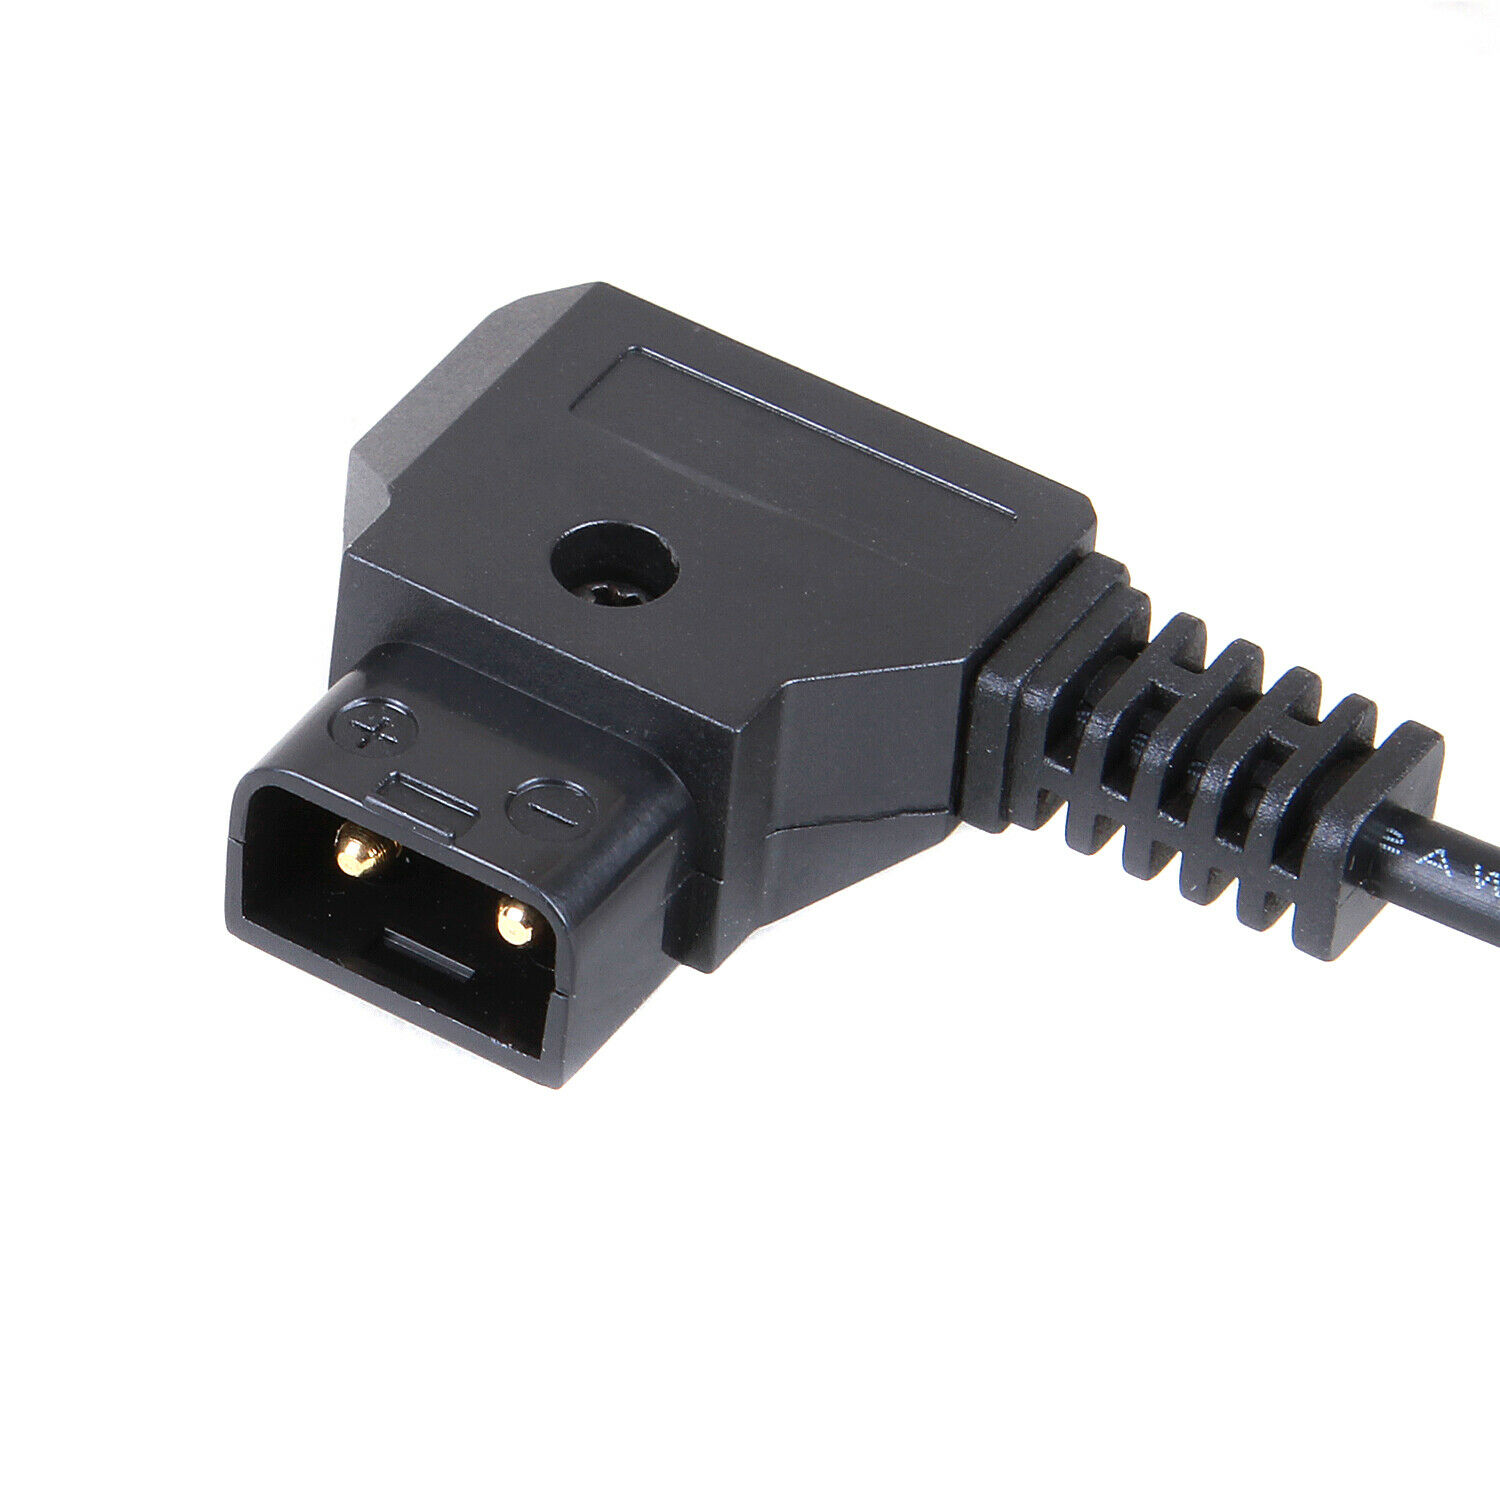 Fotga Power Adapter Cable for D-tap Connector to DMW-BLJ31 Dummy